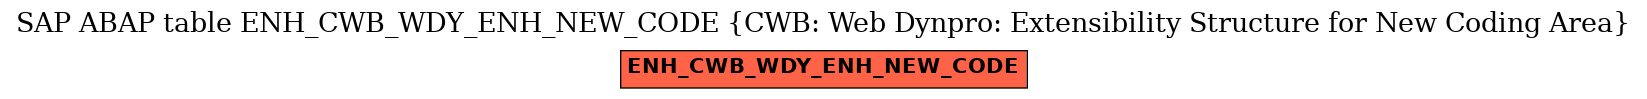 E-R Diagram for table ENH_CWB_WDY_ENH_NEW_CODE (CWB: Web Dynpro: Extensibility Structure for New Coding Area)